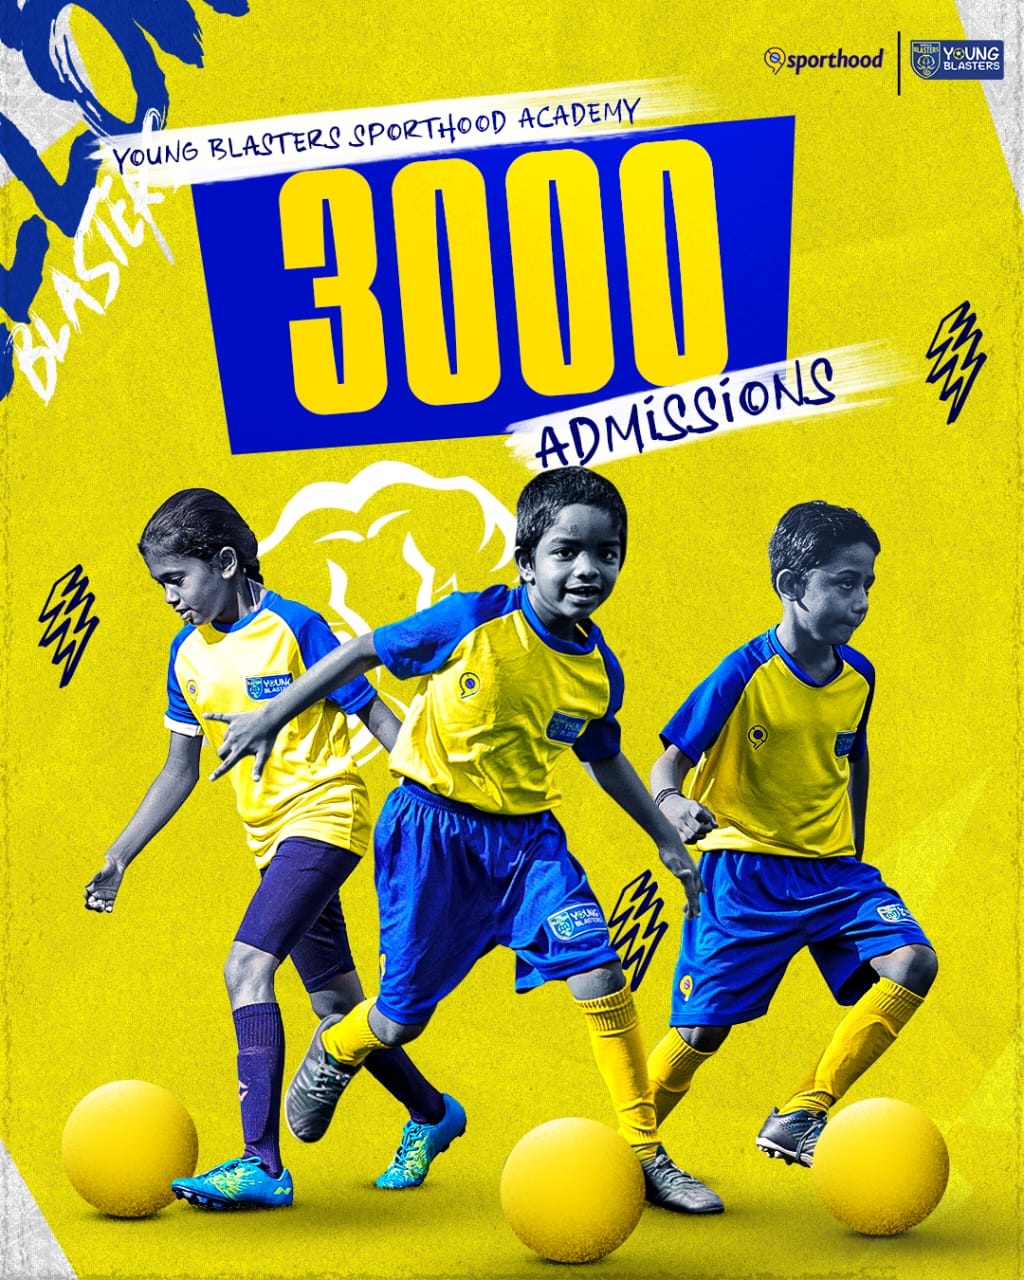 KBFC YOUNG BLASTERS SPORTHOOD ACADEMY CROSSES 3000 ADMISSIONS